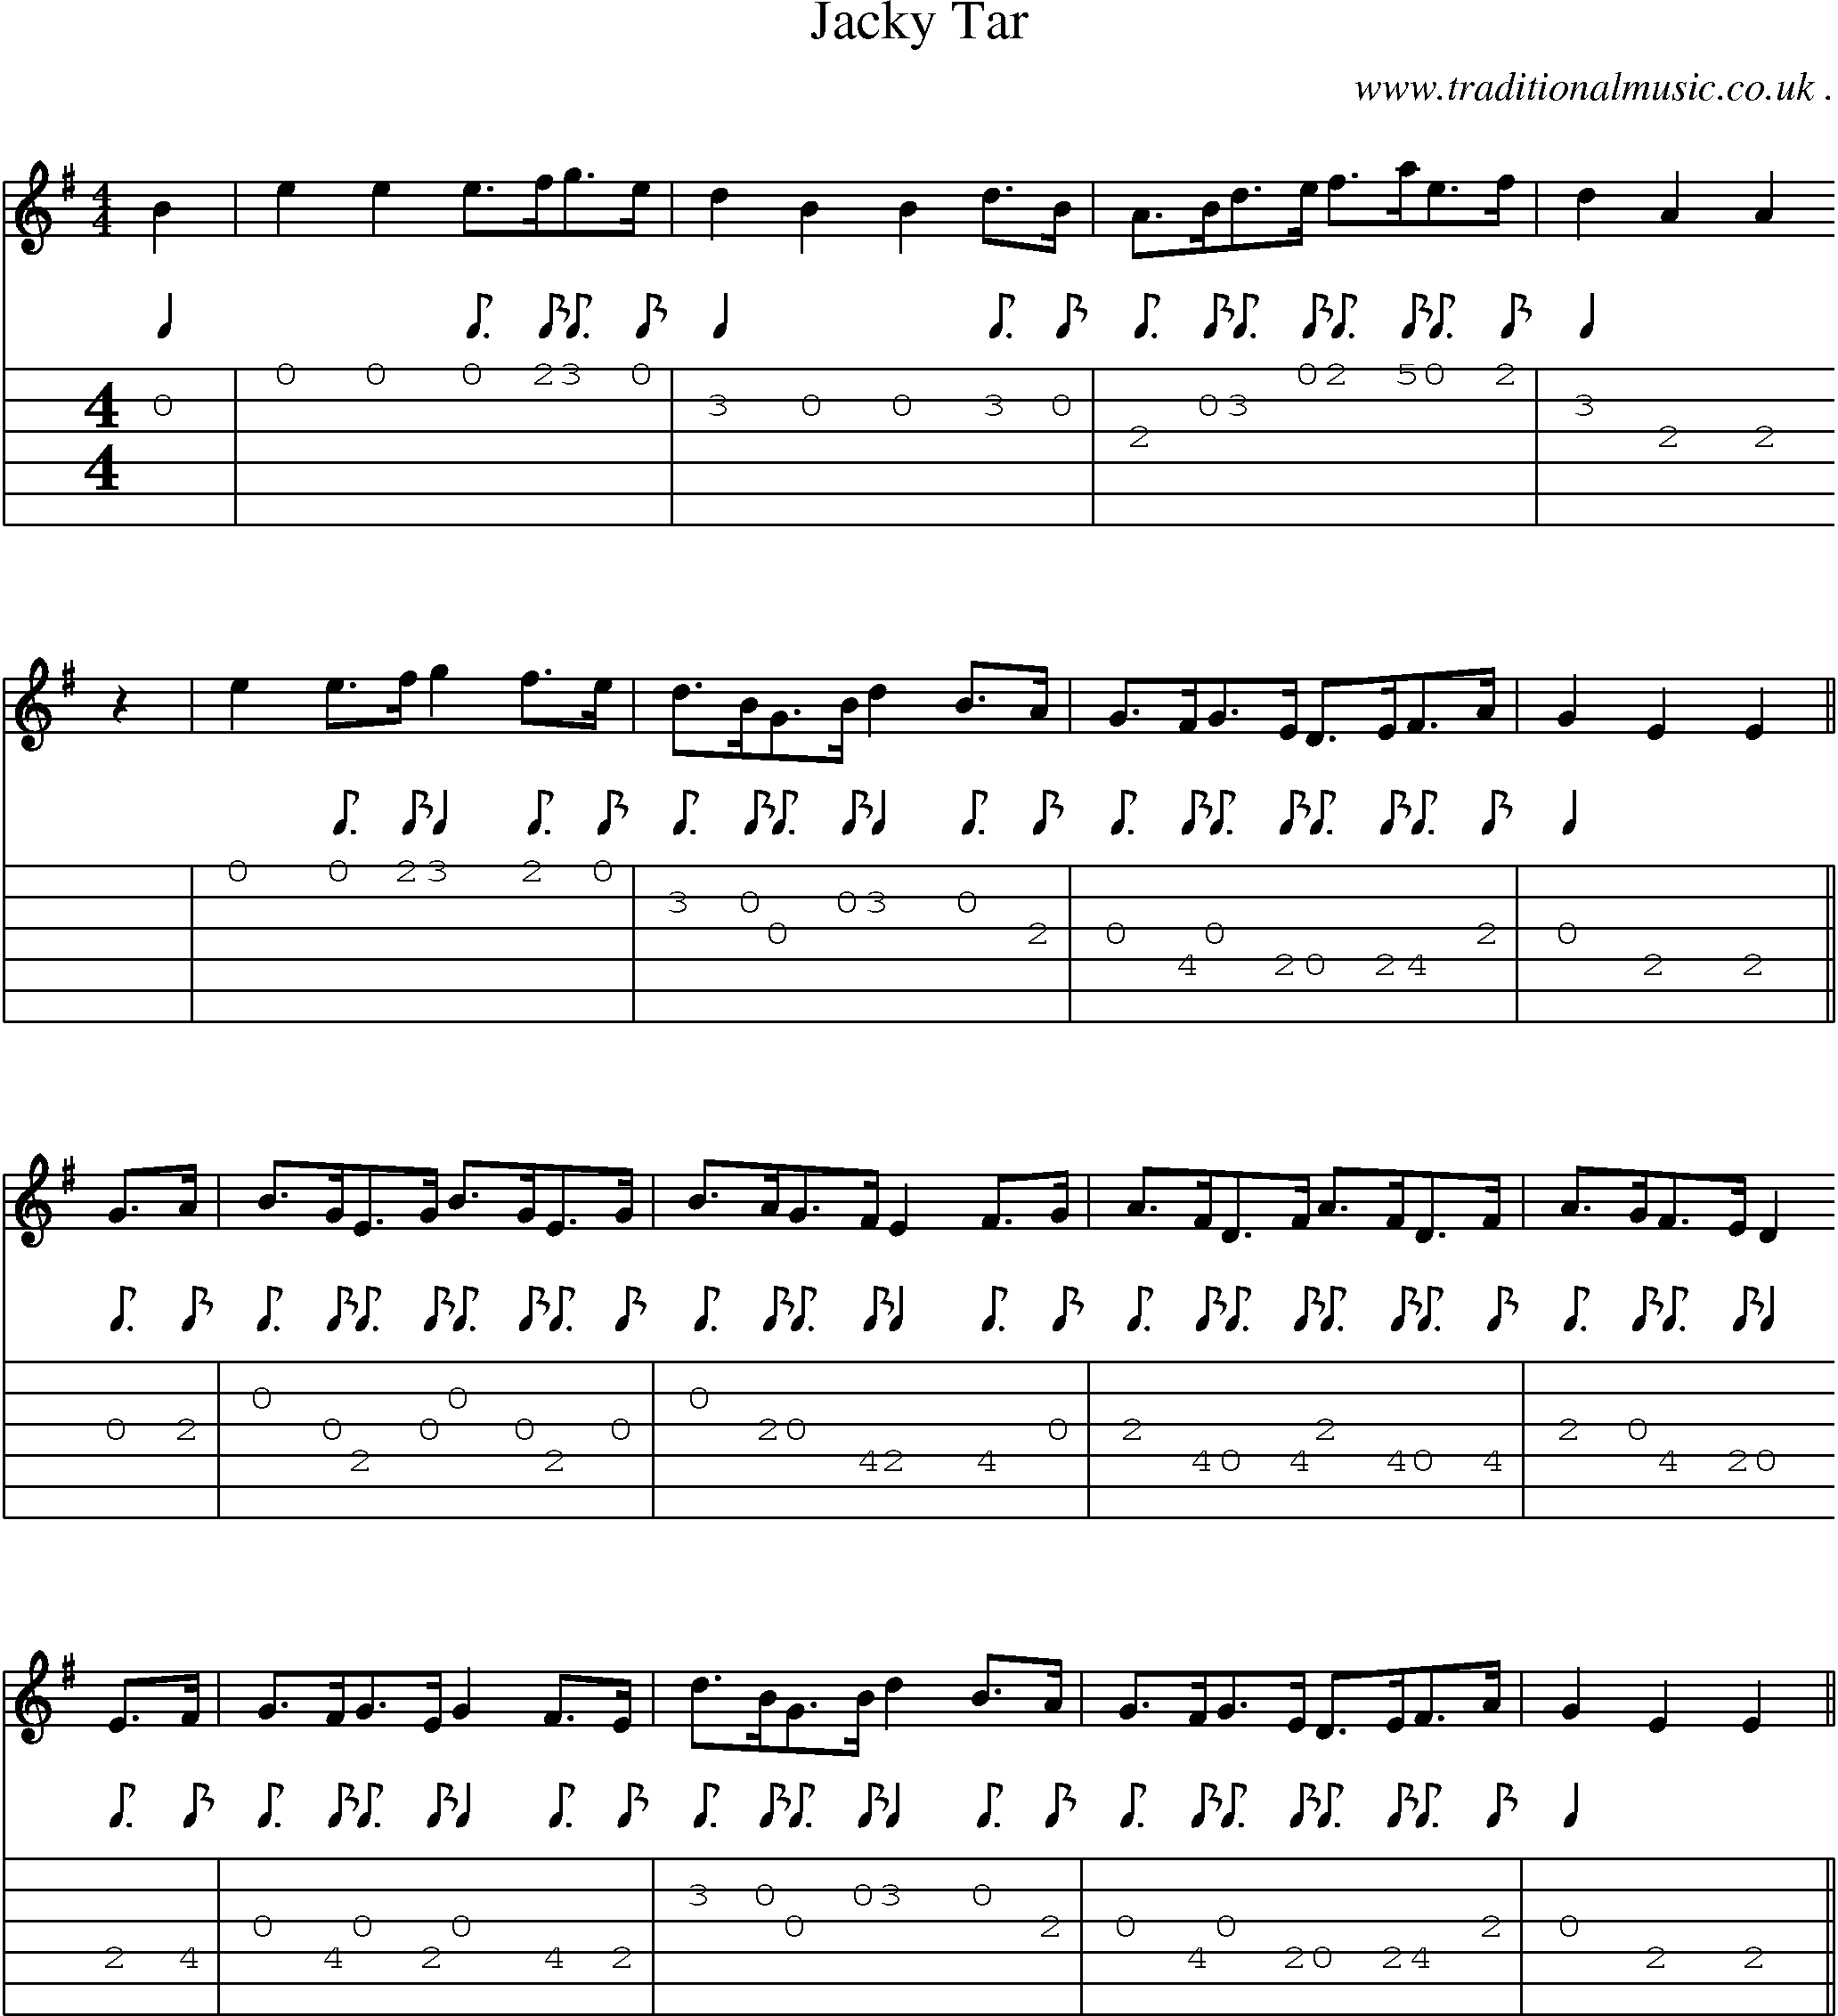 Sheet-music  score, Chords and Guitar Tabs for Jacky Tar